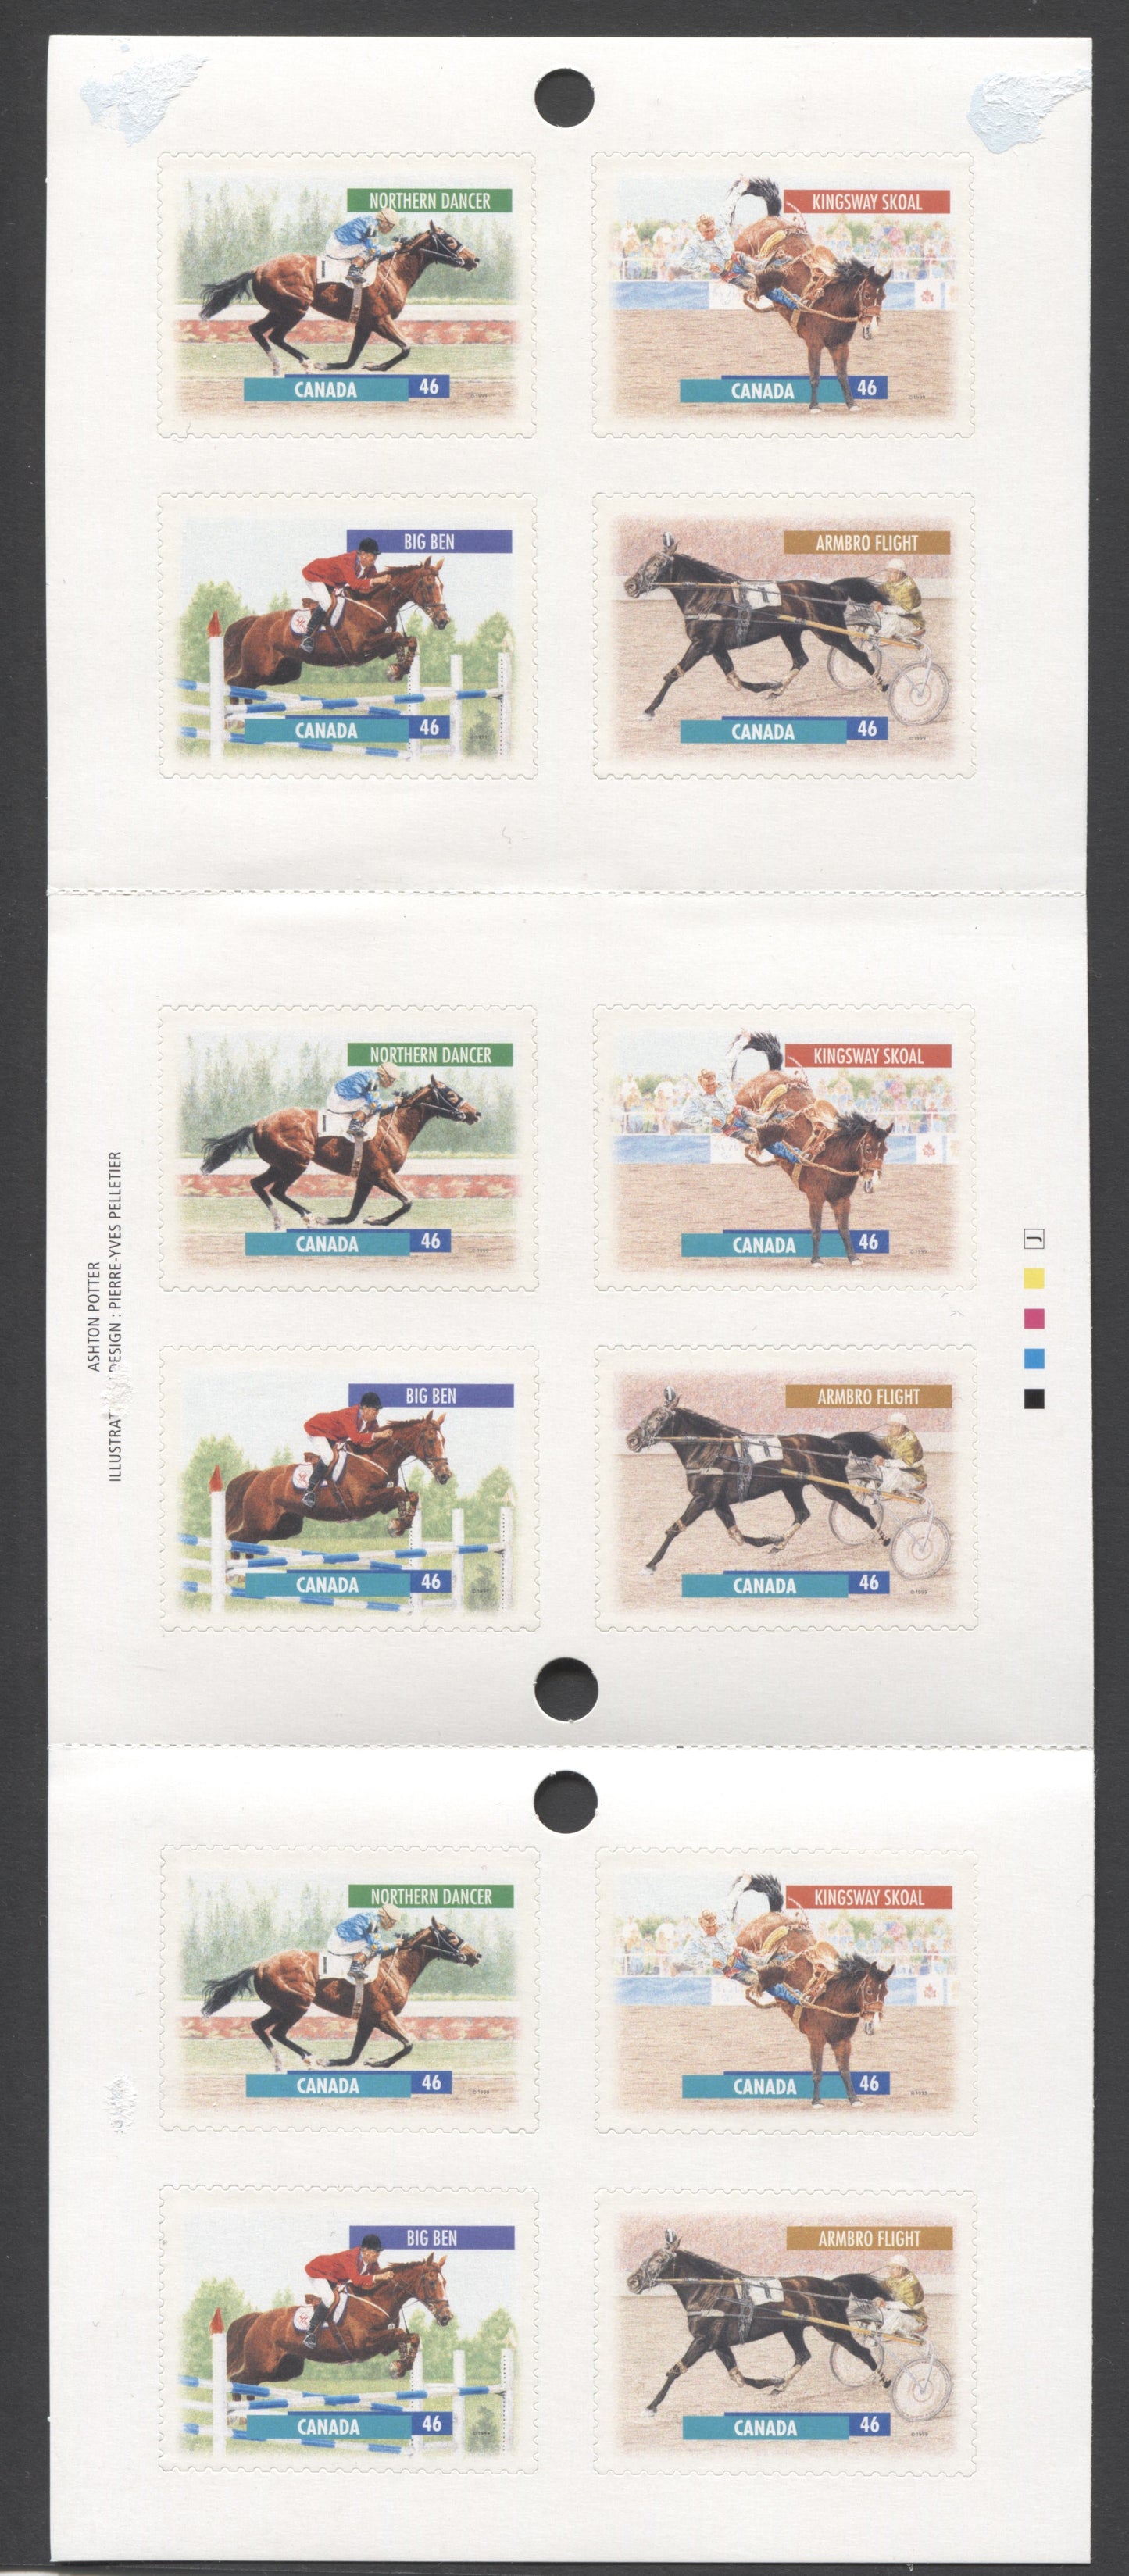 Canada #BK220a-b 1999 Horses Issue, Complete $5.52 Booklet, JAC Paper, Dead Paper, 4 mm GT-4 Tagging